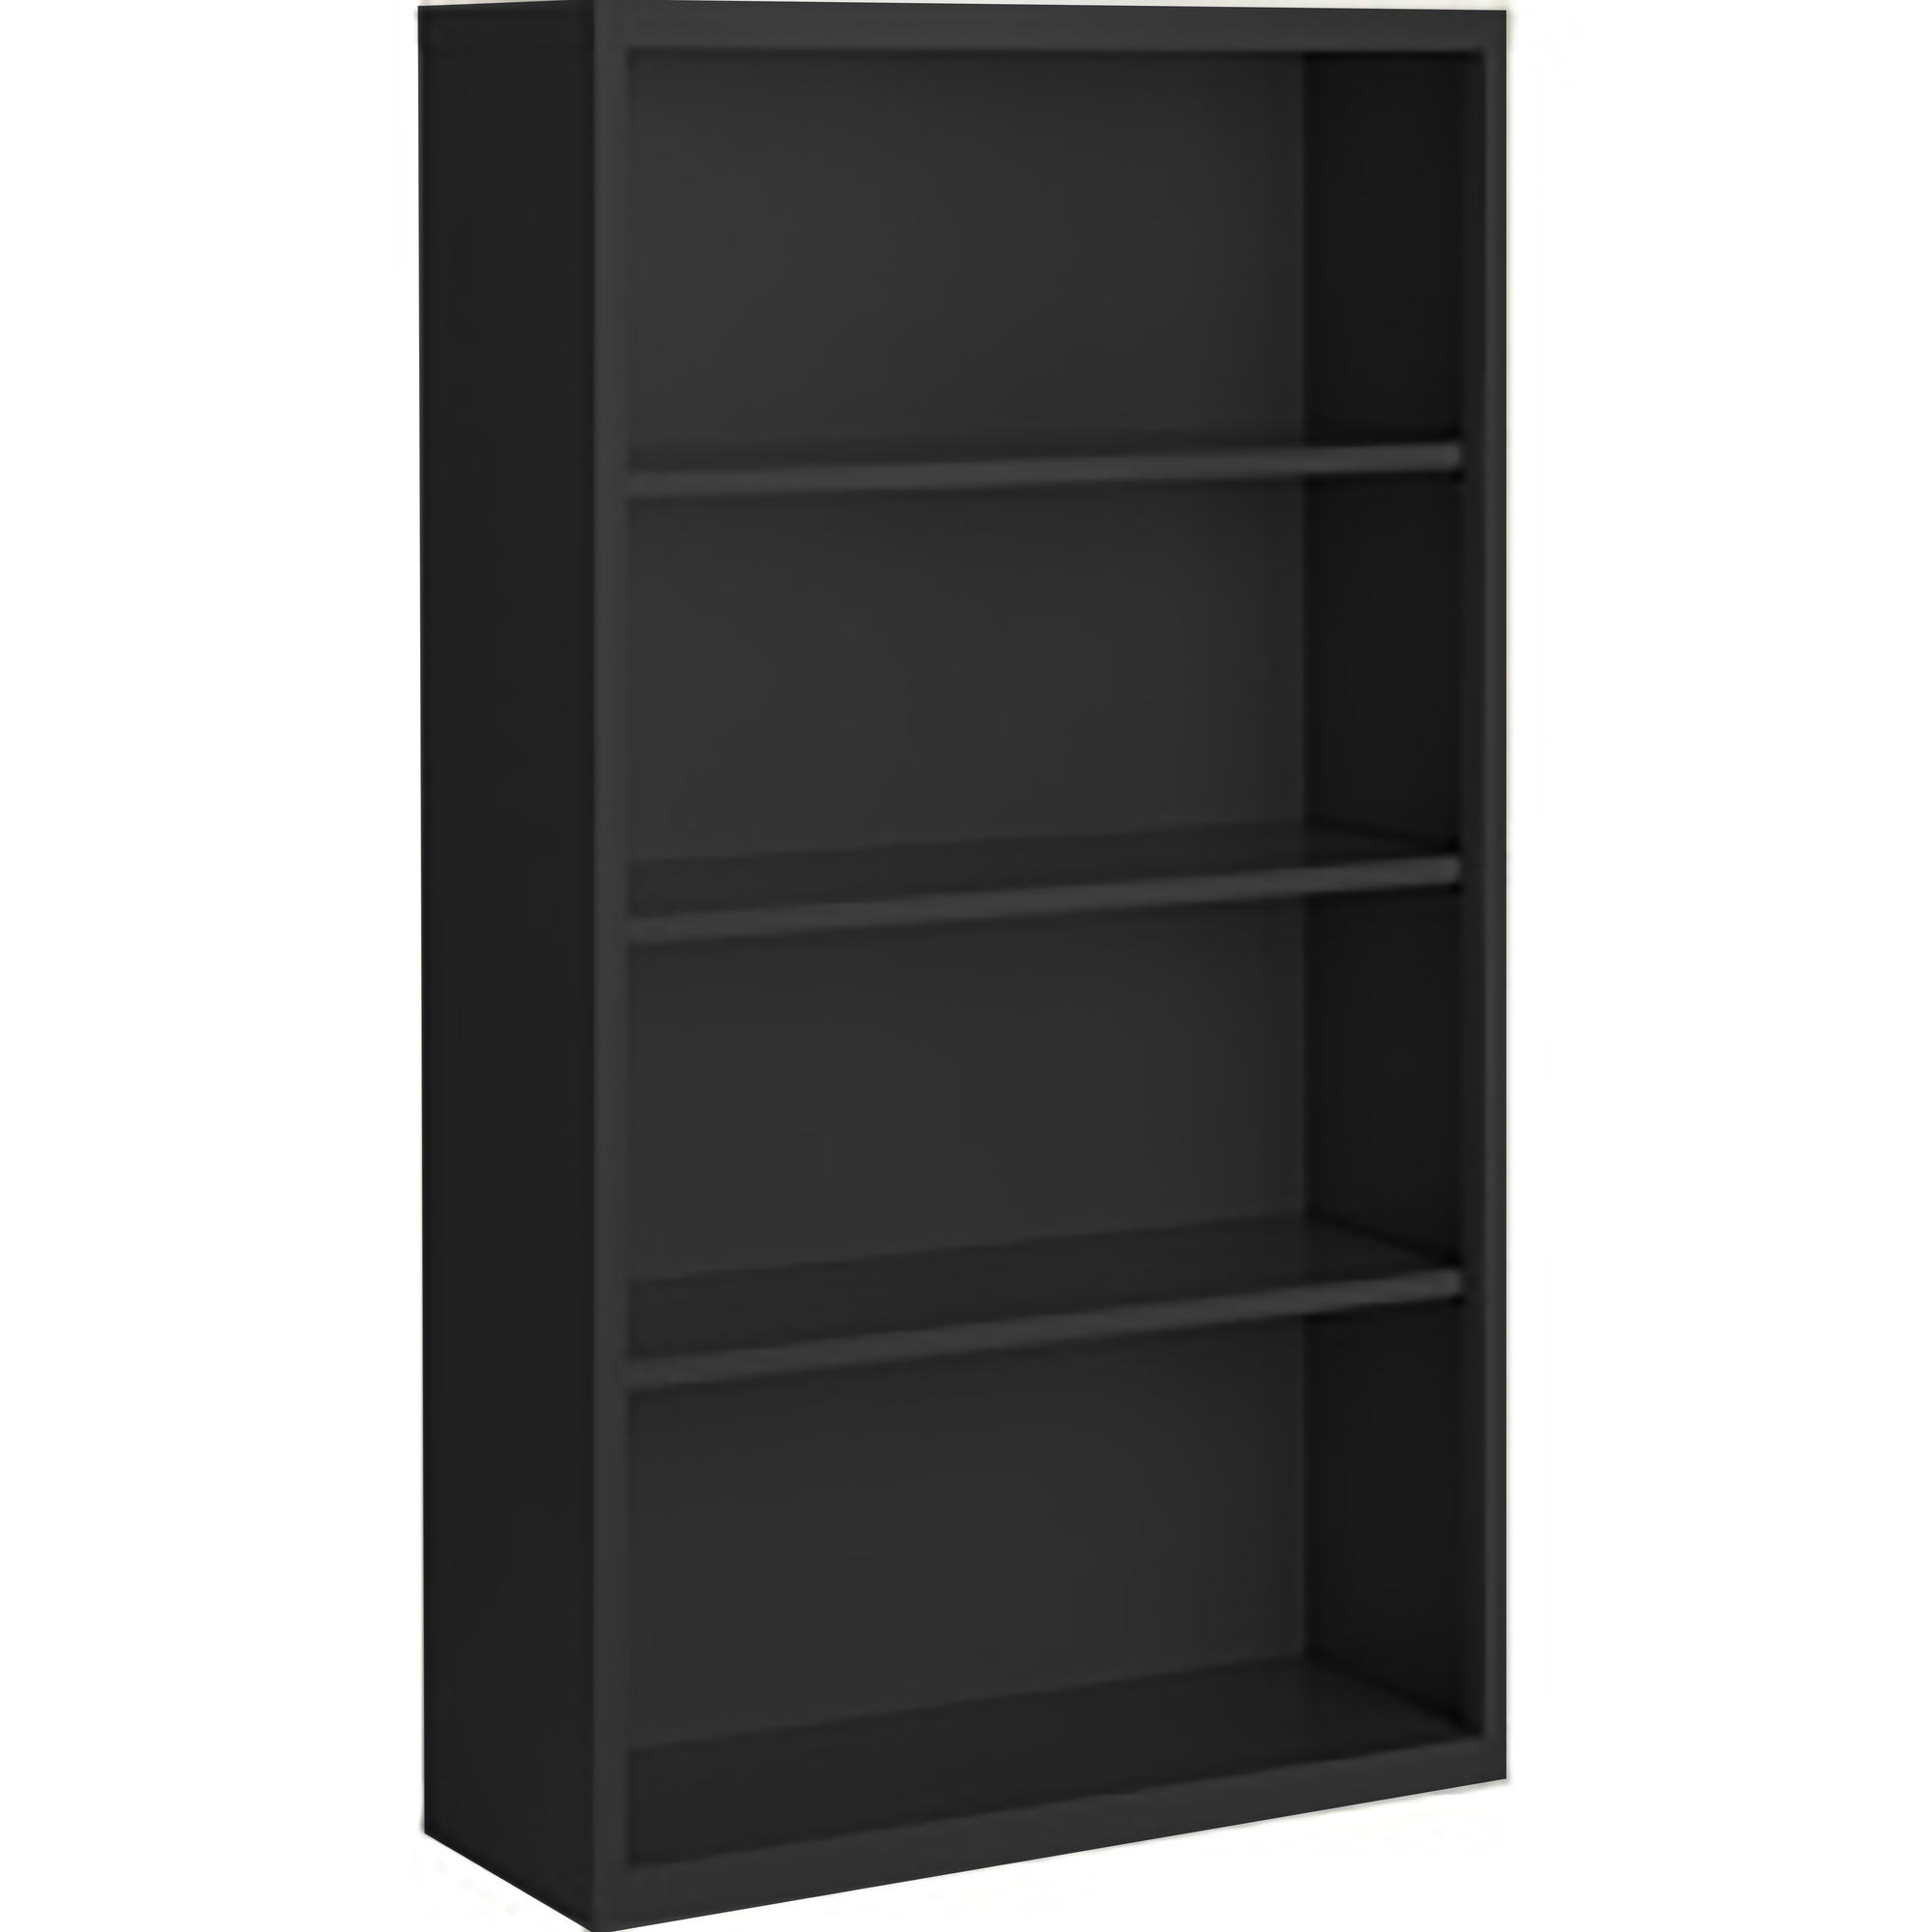 Steel Cabinets USA, 36Inchx18Inchx60Inch Black Bookcase Steel Fully Assembled, Height 60 in, Shelves (qty.) 4, Material Steel, Model BCA-366018-B